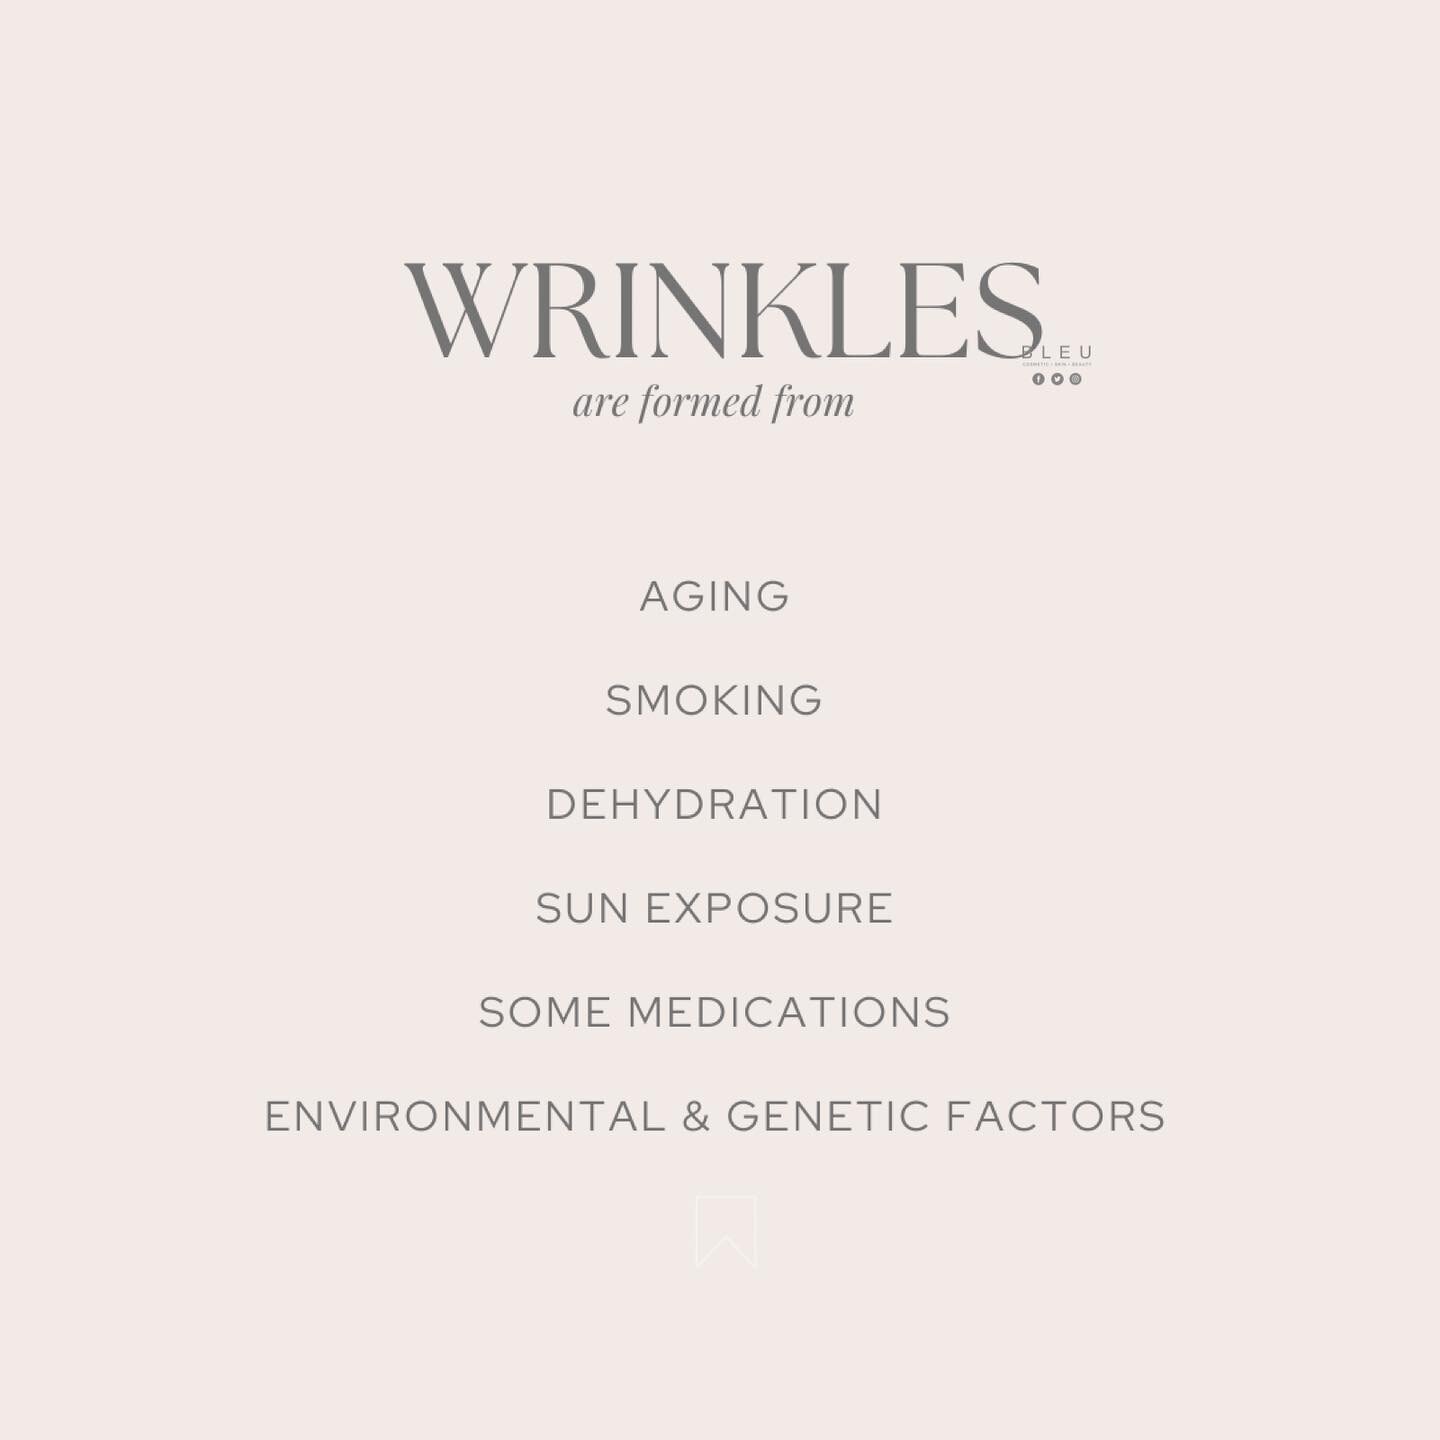 𝐀𝐧𝐭𝐢-𝐀𝐠𝐢𝐧𝐠 

Wrinkles are a natural part of aging and are more prominent on sun-exposed skin, such as the face, neck, hands and forearms.

Although genetics mainly determine skin structure and texture, sun exposure is a major cause of wrinkl